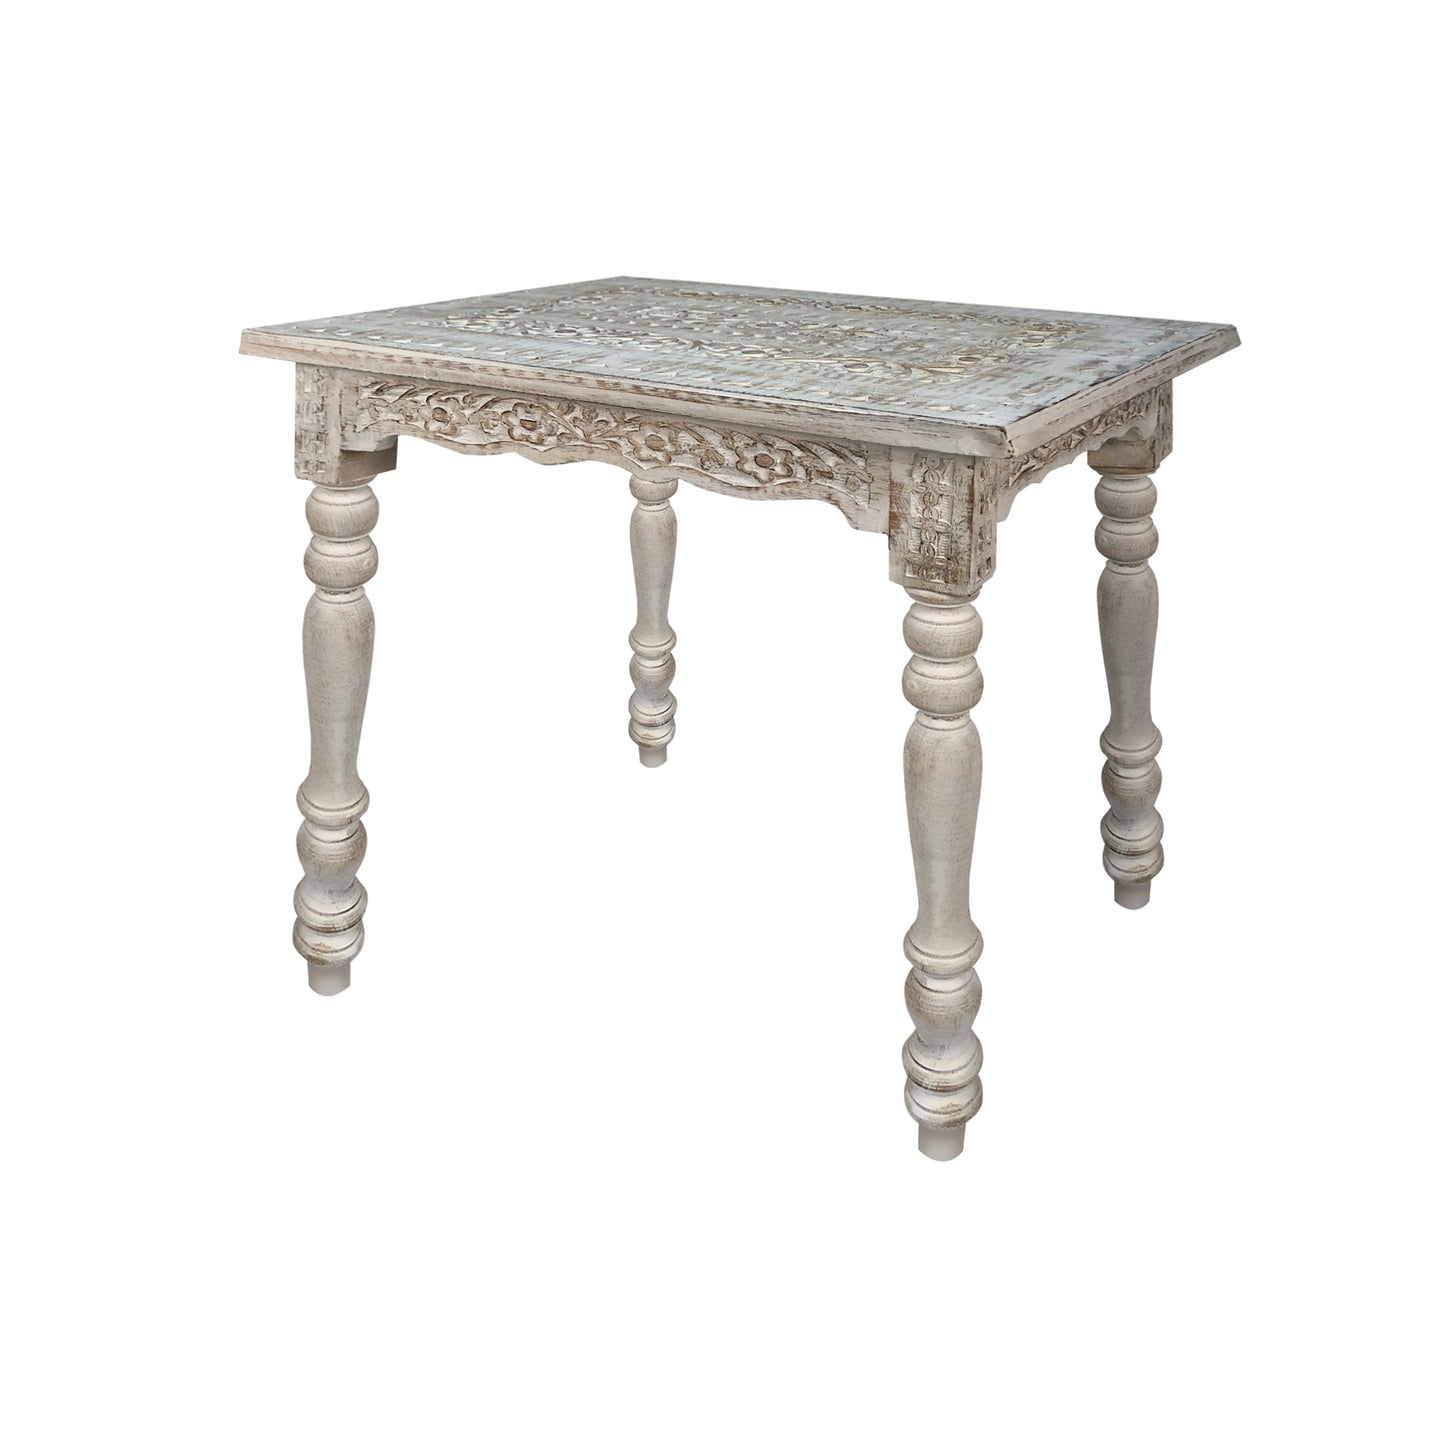 Wooden Side Table with Carved Rectangular Top and Turned Legs Antique White By The Urban Port By The Urban Port UPT-248150